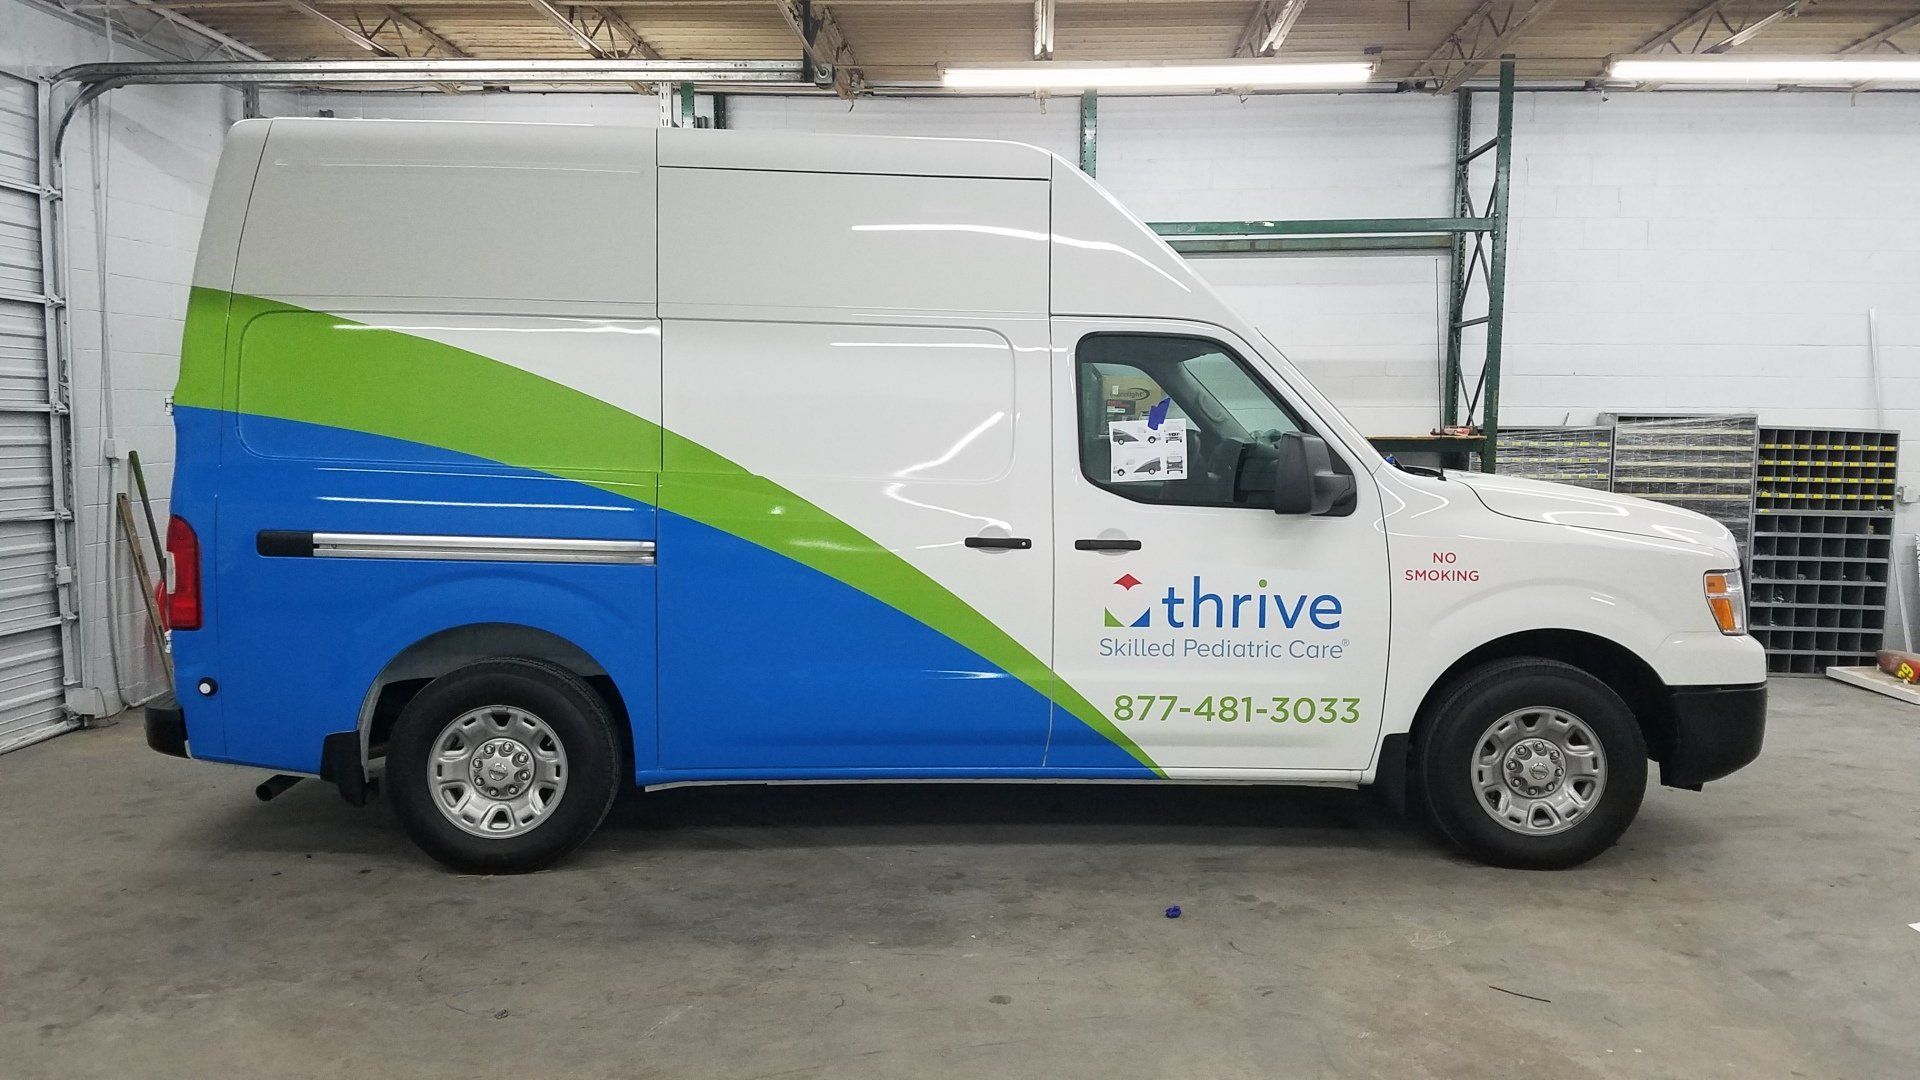 thrive Skilled Pediatric Care Commercial Vehicle Wrap